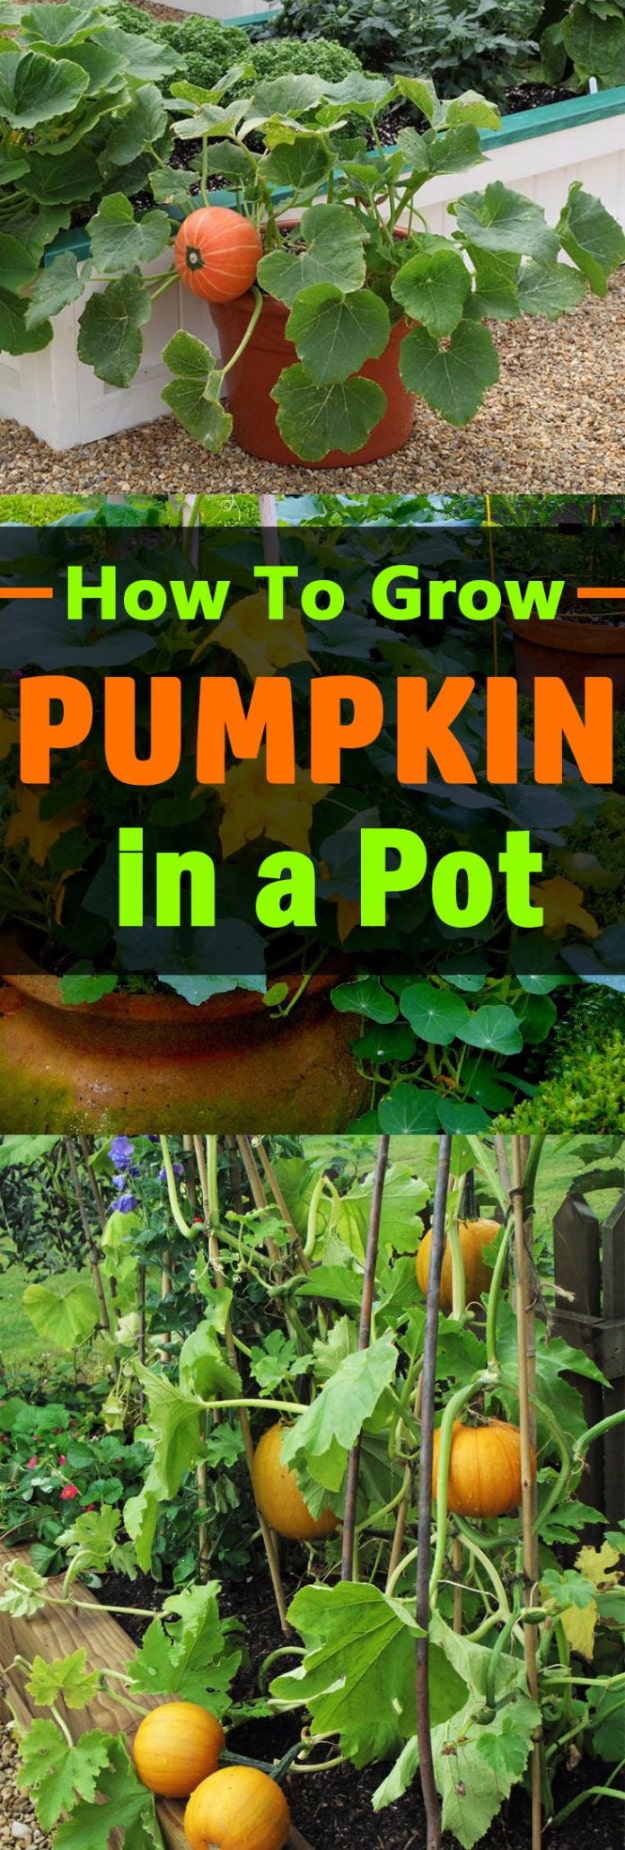 Best Gardening Ideas for Fall - Grow Pumpkins In A Pot - Cool DIY Garden Ideas for Planting Autumn Varieties of Flowers and Vegetables - Pumpkins, Container Gardens, Planting Tips, Herbs and Easy Ideas for Beginners 